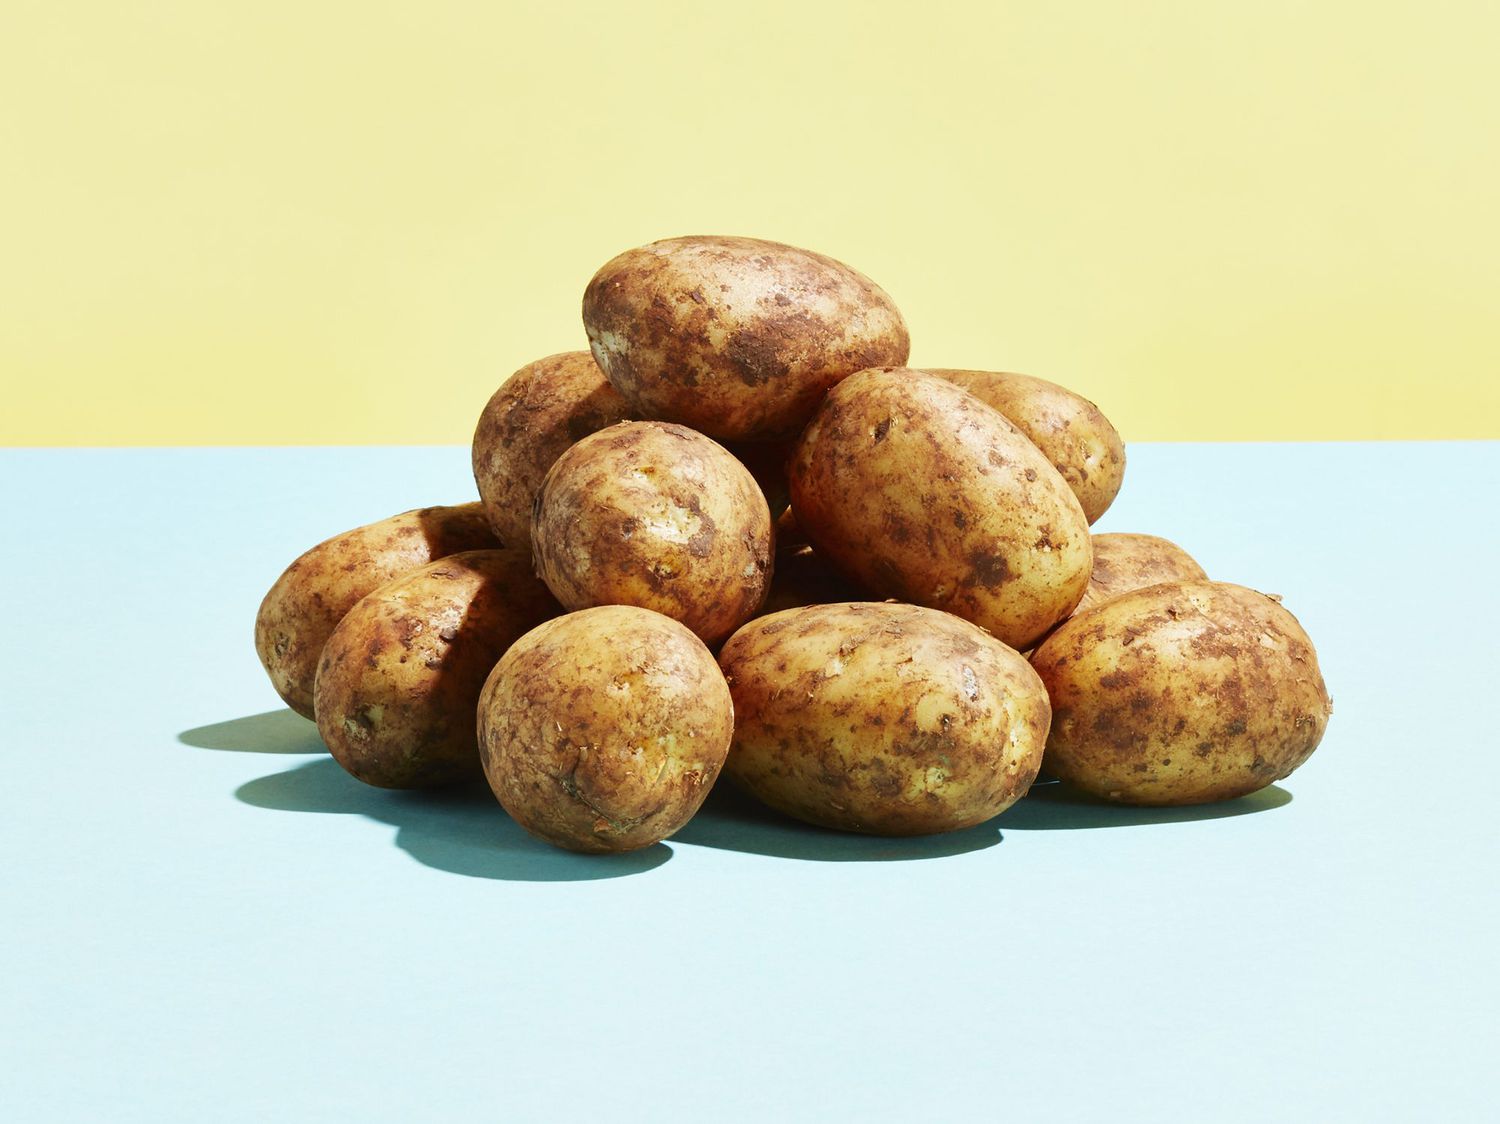 5 Easy Ways to Cook With New Potatoes—Plus All the Healthy Reasons You Should Eat Them